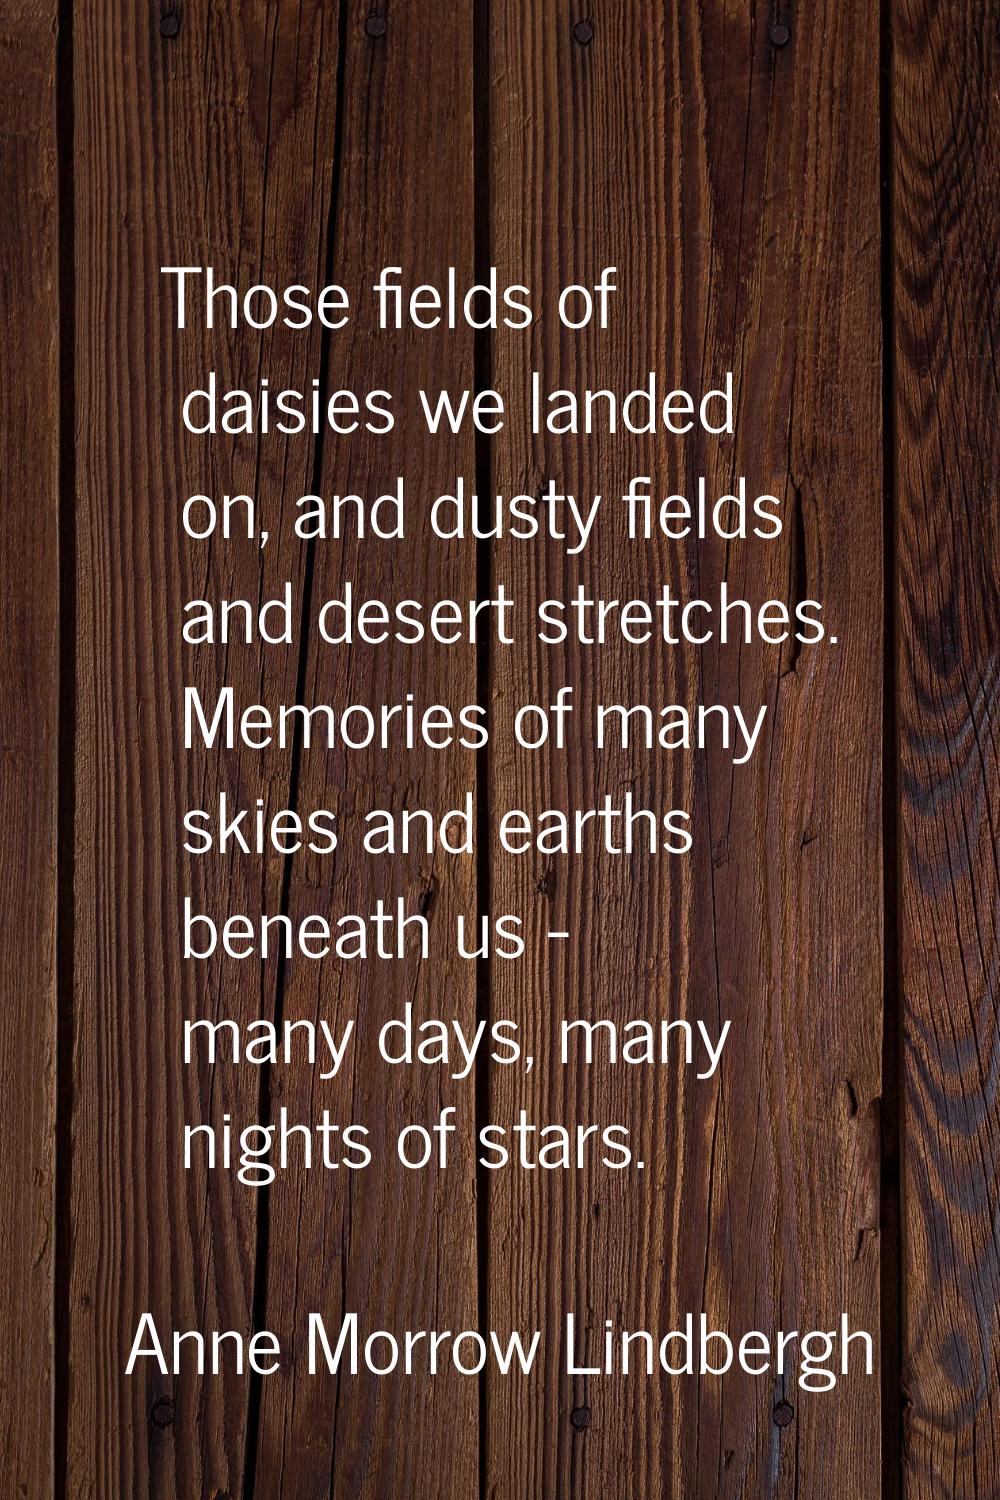 Those fields of daisies we landed on, and dusty fields and desert stretches. Memories of many skies